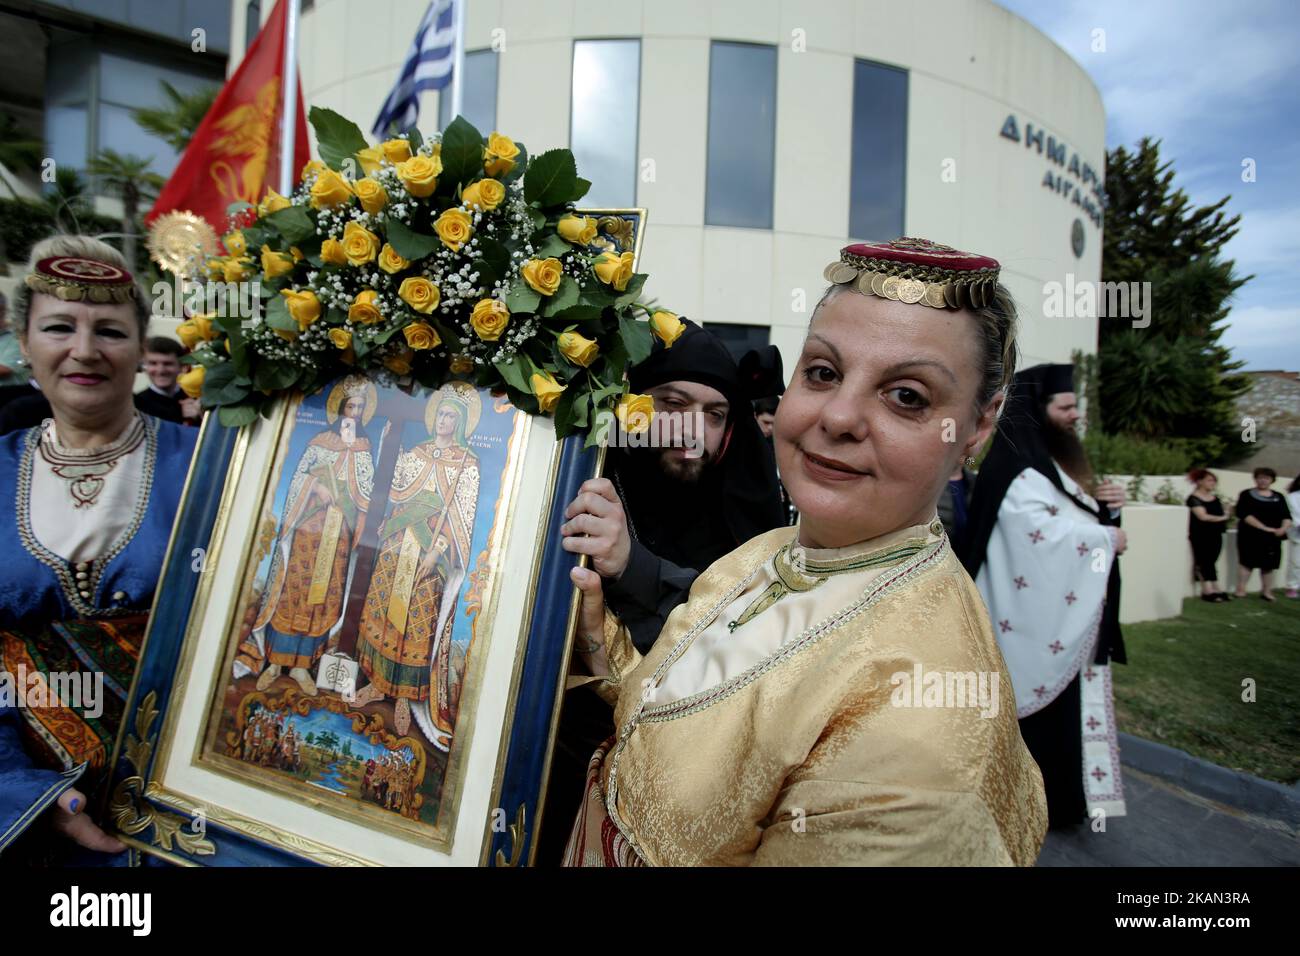 Greek Orthodox women dressed in traditional costumes hold a religious icon with Asent Constantine and St. Helena attend the religious procession during the official reception of the True Cross and Sacred Relics of Aghia Eleni (St. Helena) at Egaleo, west suburb of Athens, Greece, on Sunday May 14, 2017. The relics of Saint Helena were transported from Venice, Italy and will remain in the Pilgrimage Temple of Saint Barbara, in the Municipality of Attica until June 15. (Photo by Panayotis Tzamaros/NurPhoto) *** Please Use Credit from Credit Field *** Stock Photo